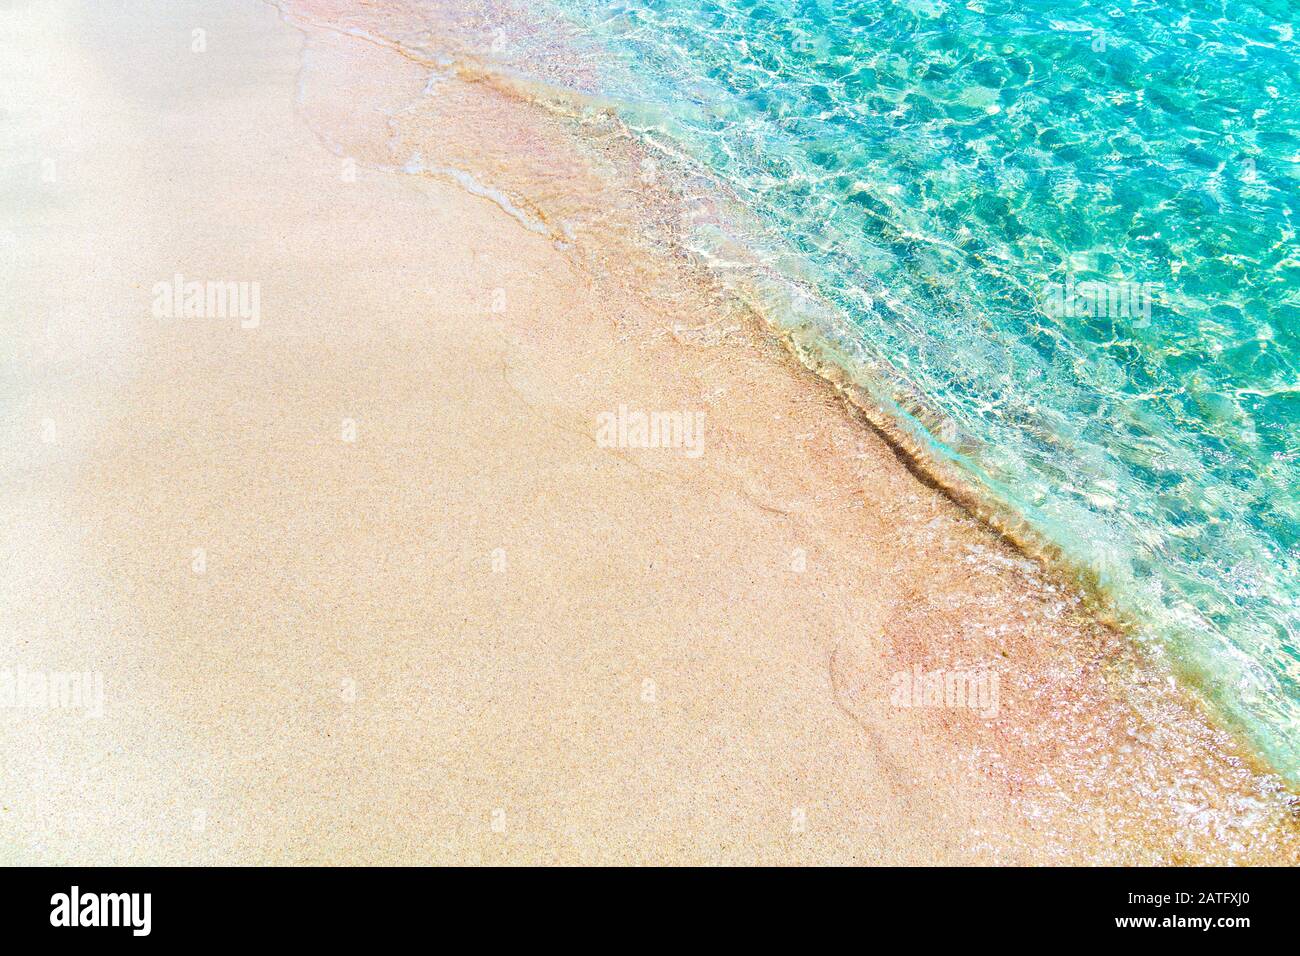 Clear blue azure water with white sandy beach background (S'Espalmador, Balearic Islands, Spain) Stock Photo